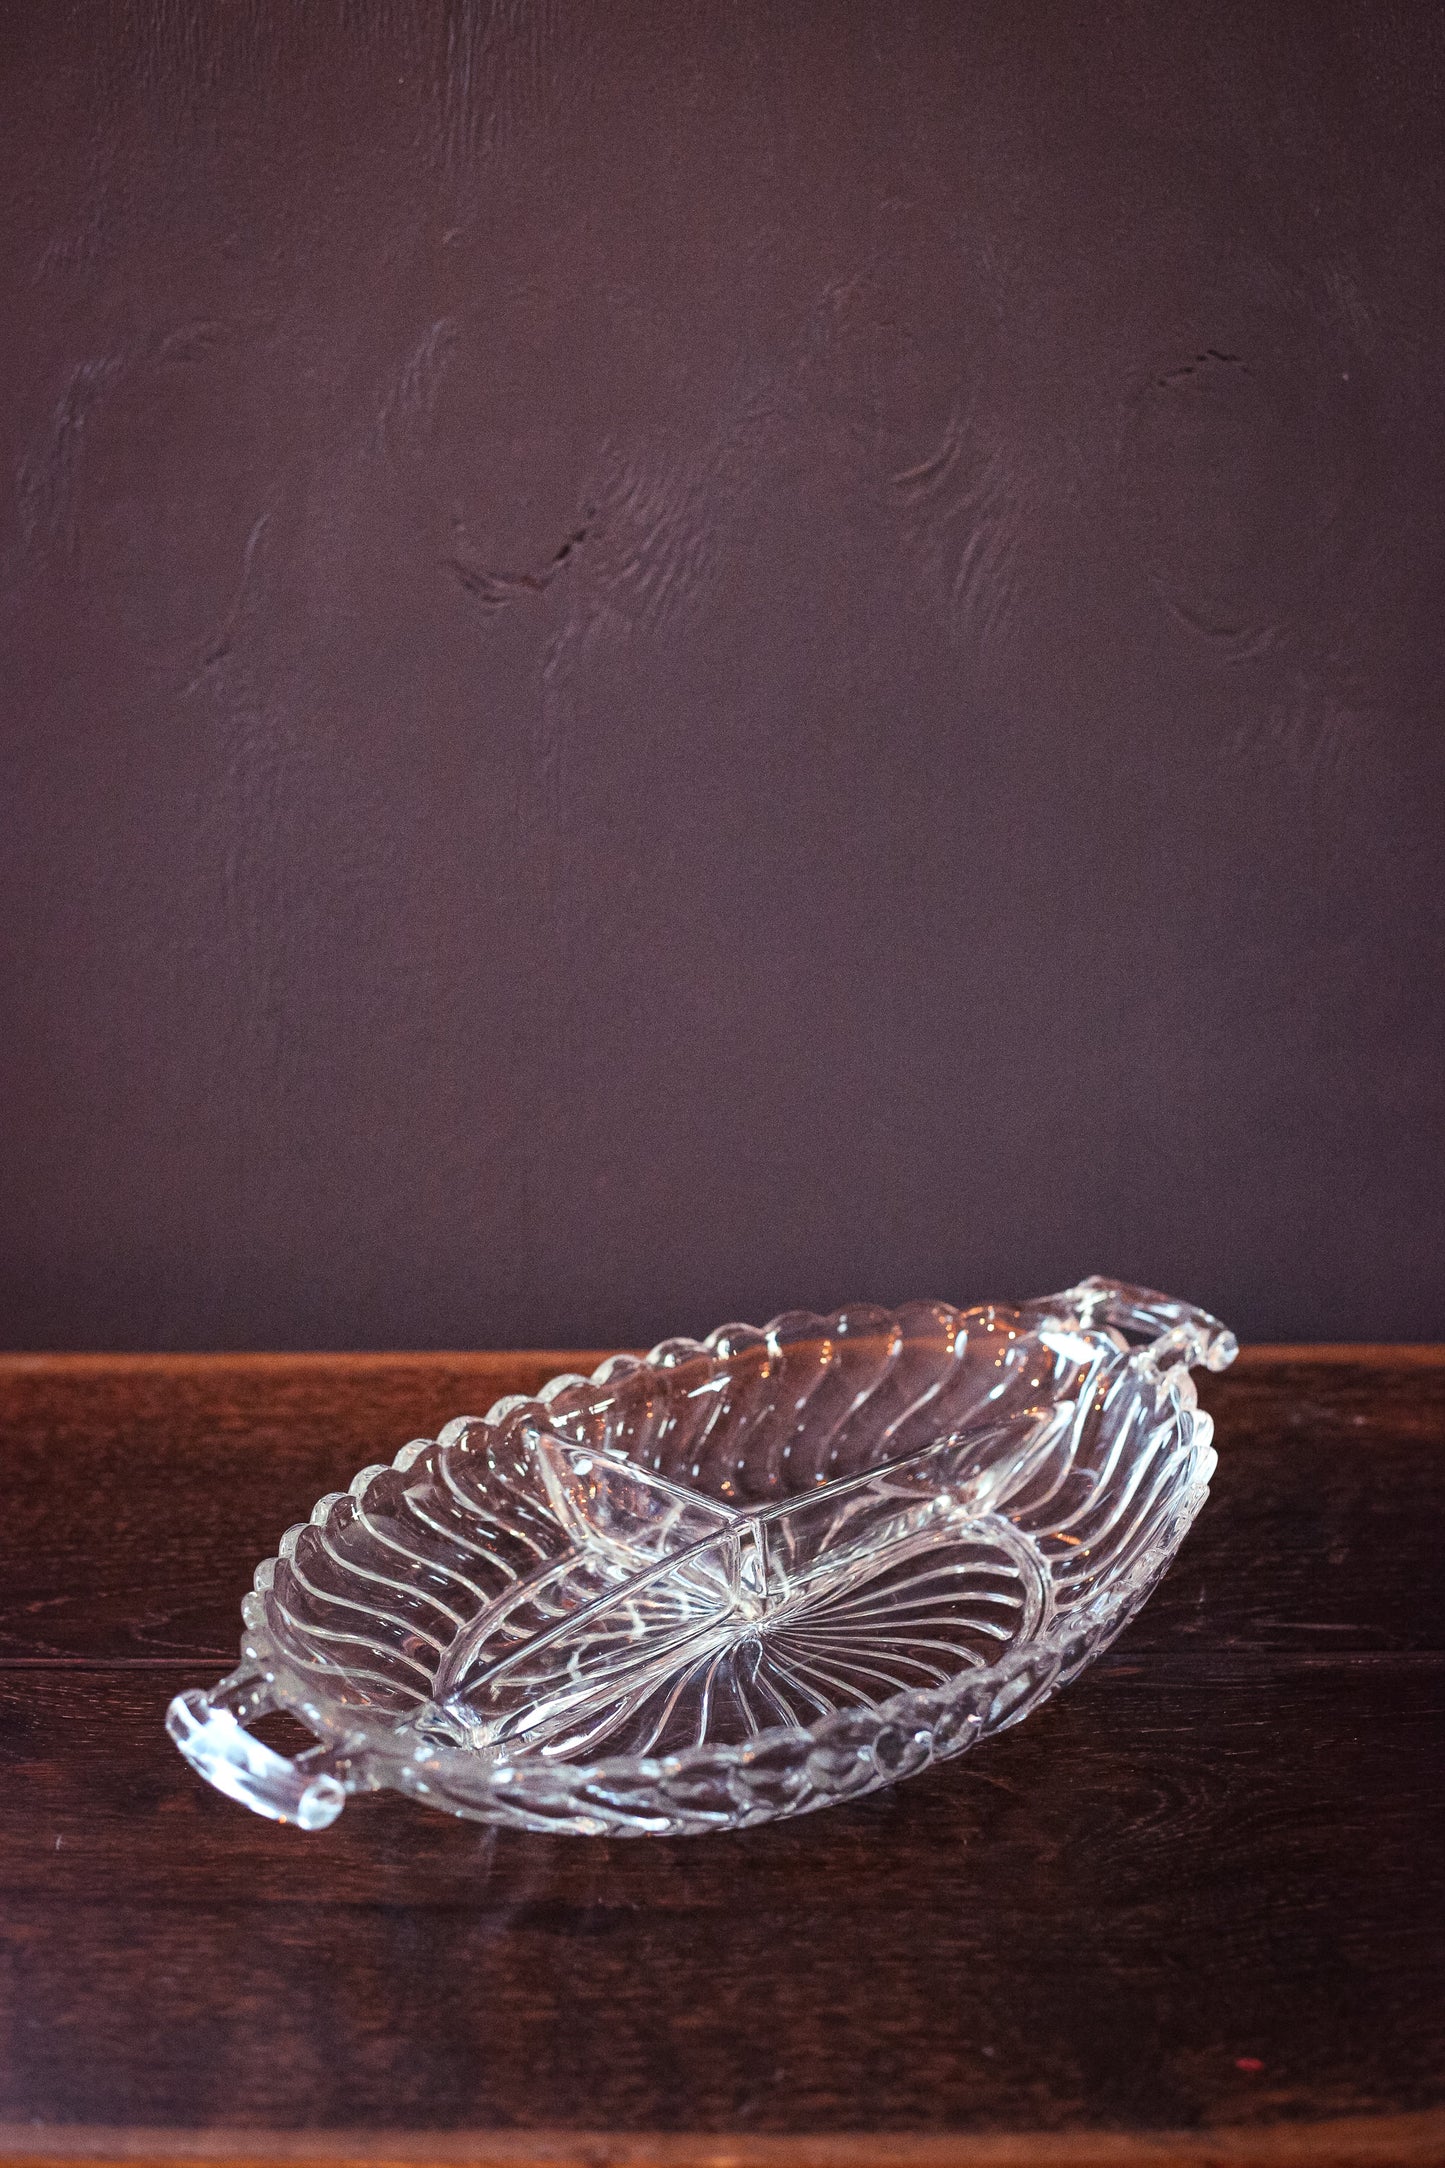 Divided Crystal Serving Platter with Handles - Fostoria Colony Pattern Crystal Platter/Divided Relish Dish